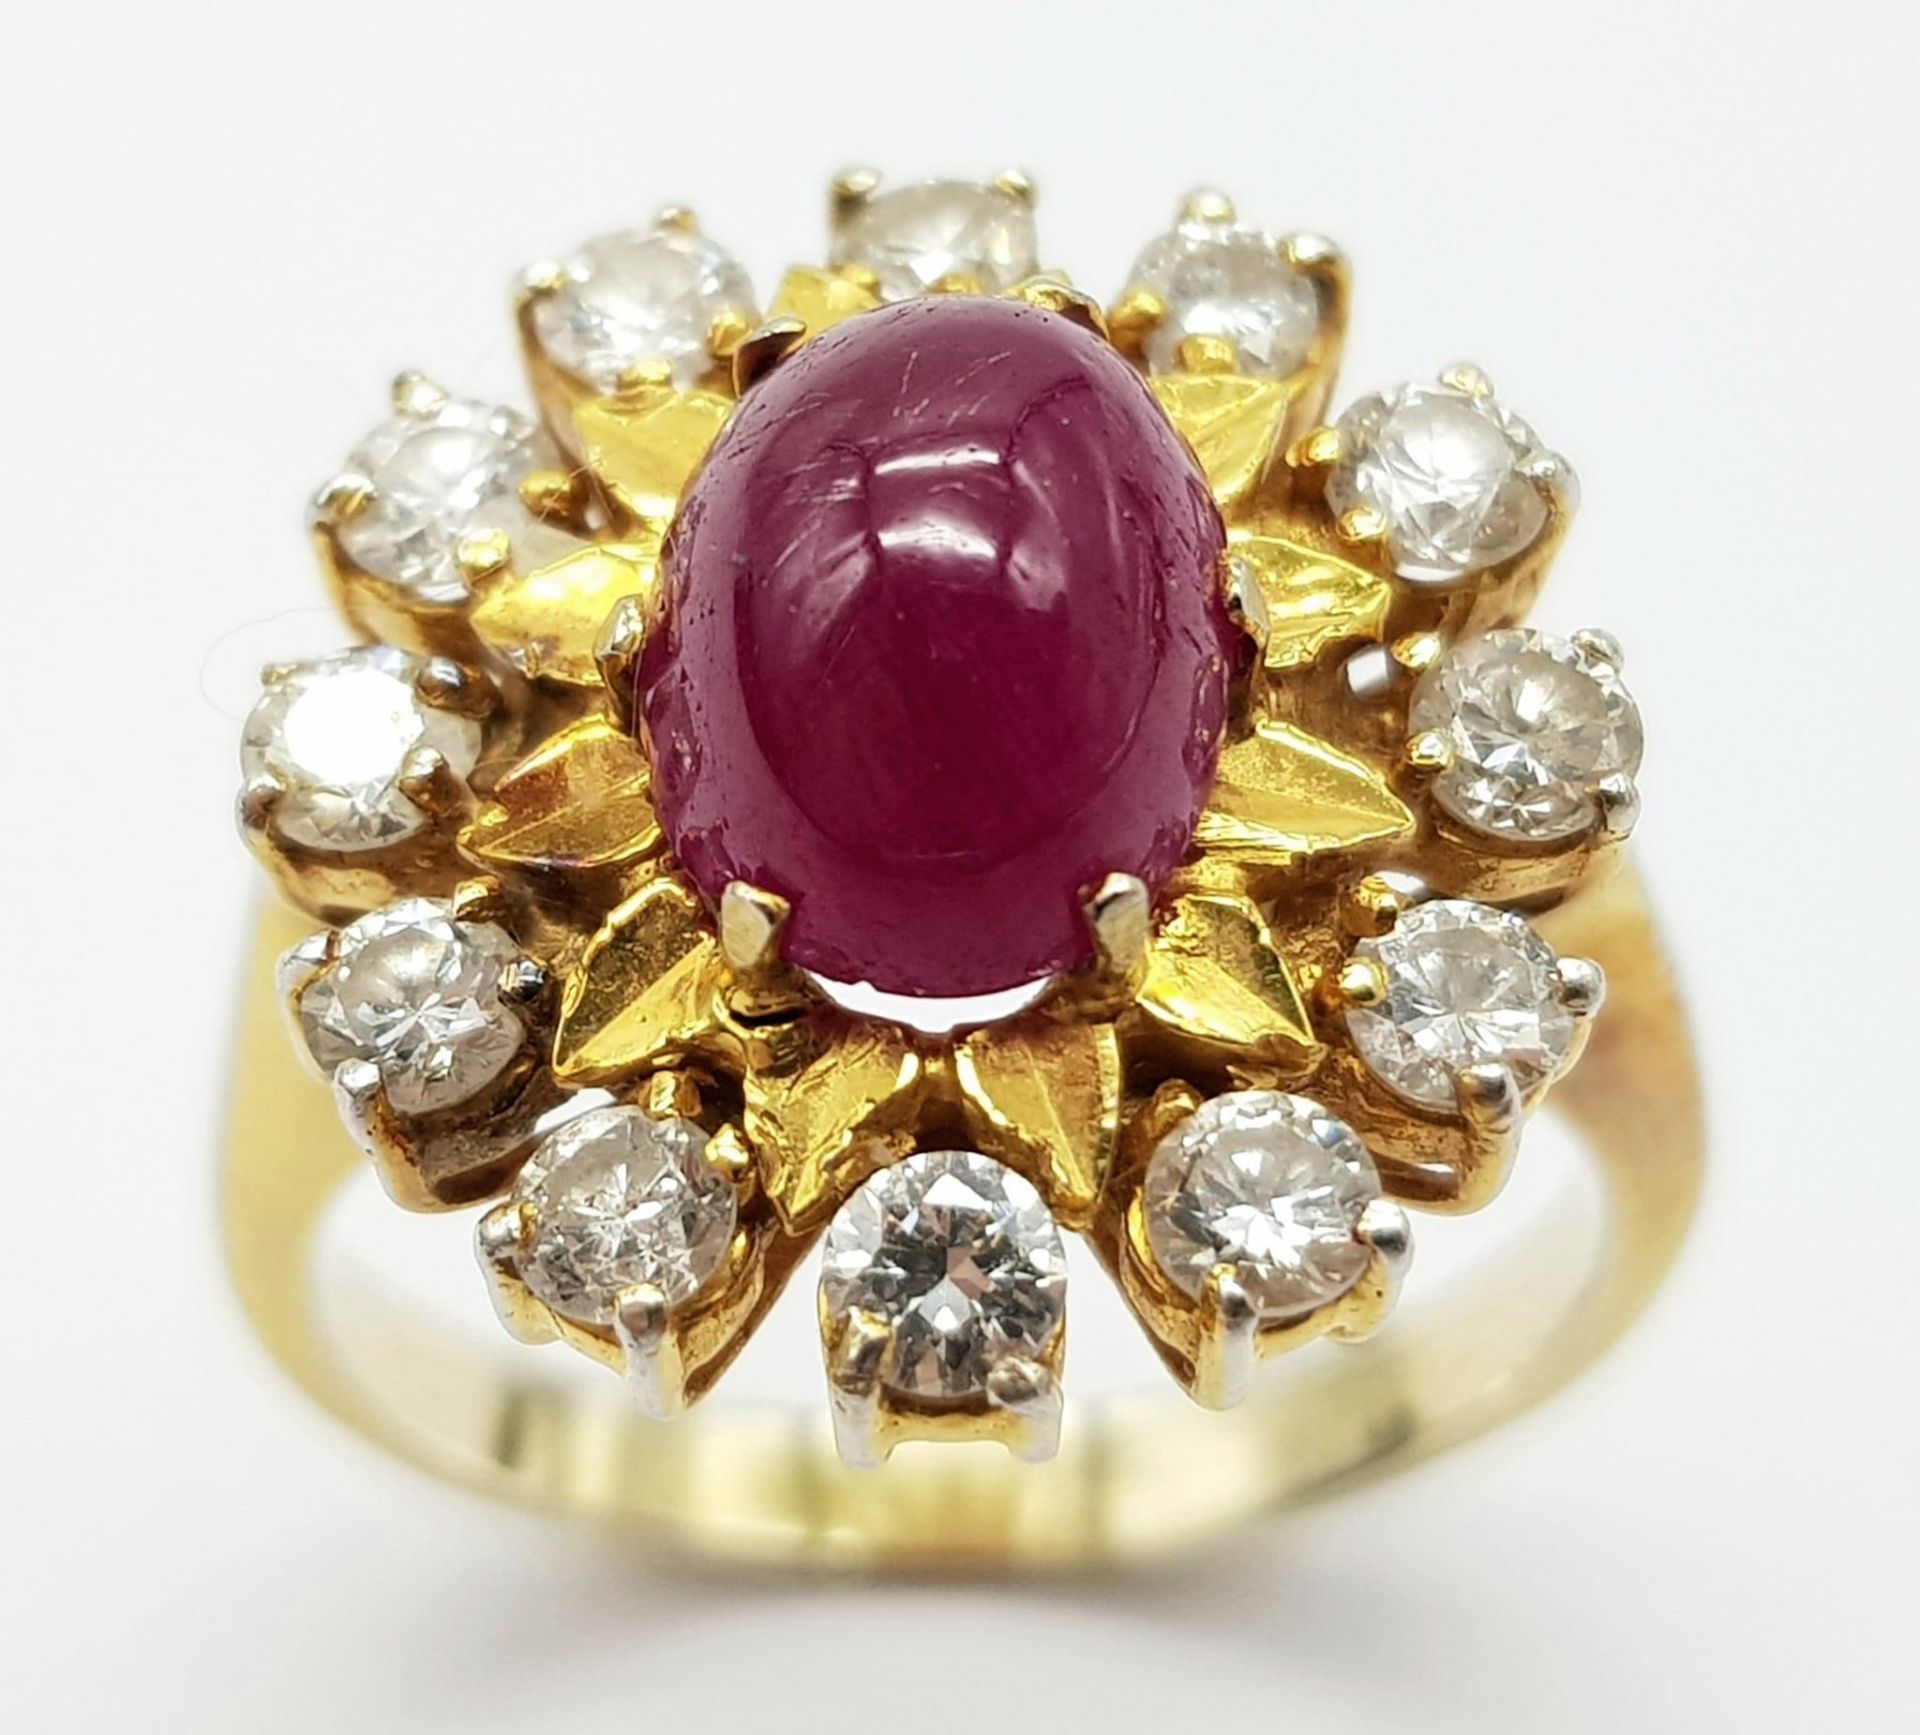 An 18K Gold (tested) Ruby and Diamond Ring. A 1.5ct high-grade ruby cabochon with a brilliant cut 12